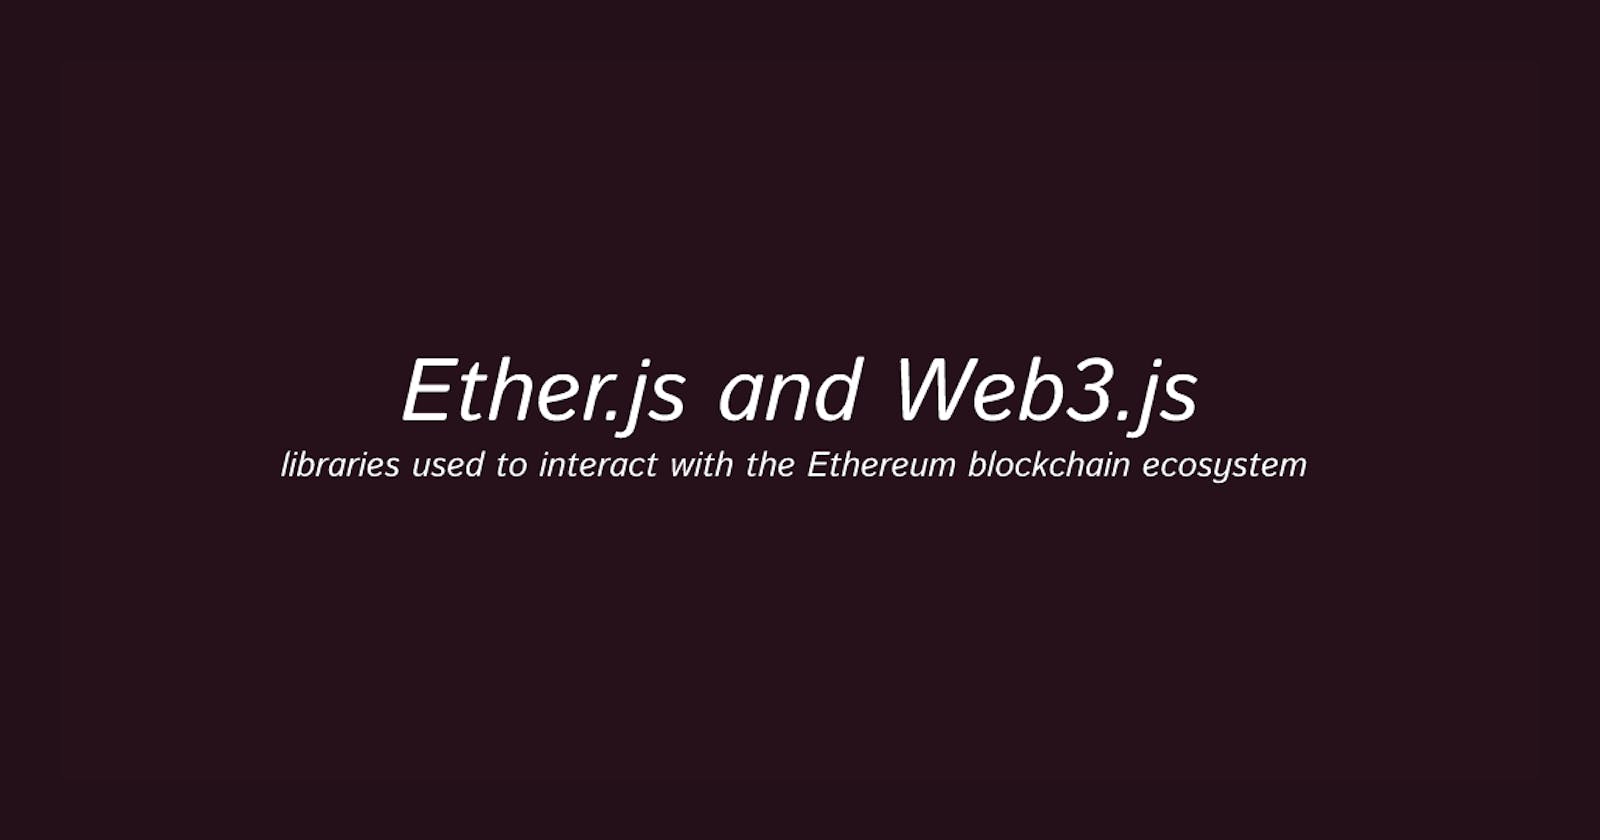 Day 11 / #100DaysOfWeb3 Ethers.js and Web3.js